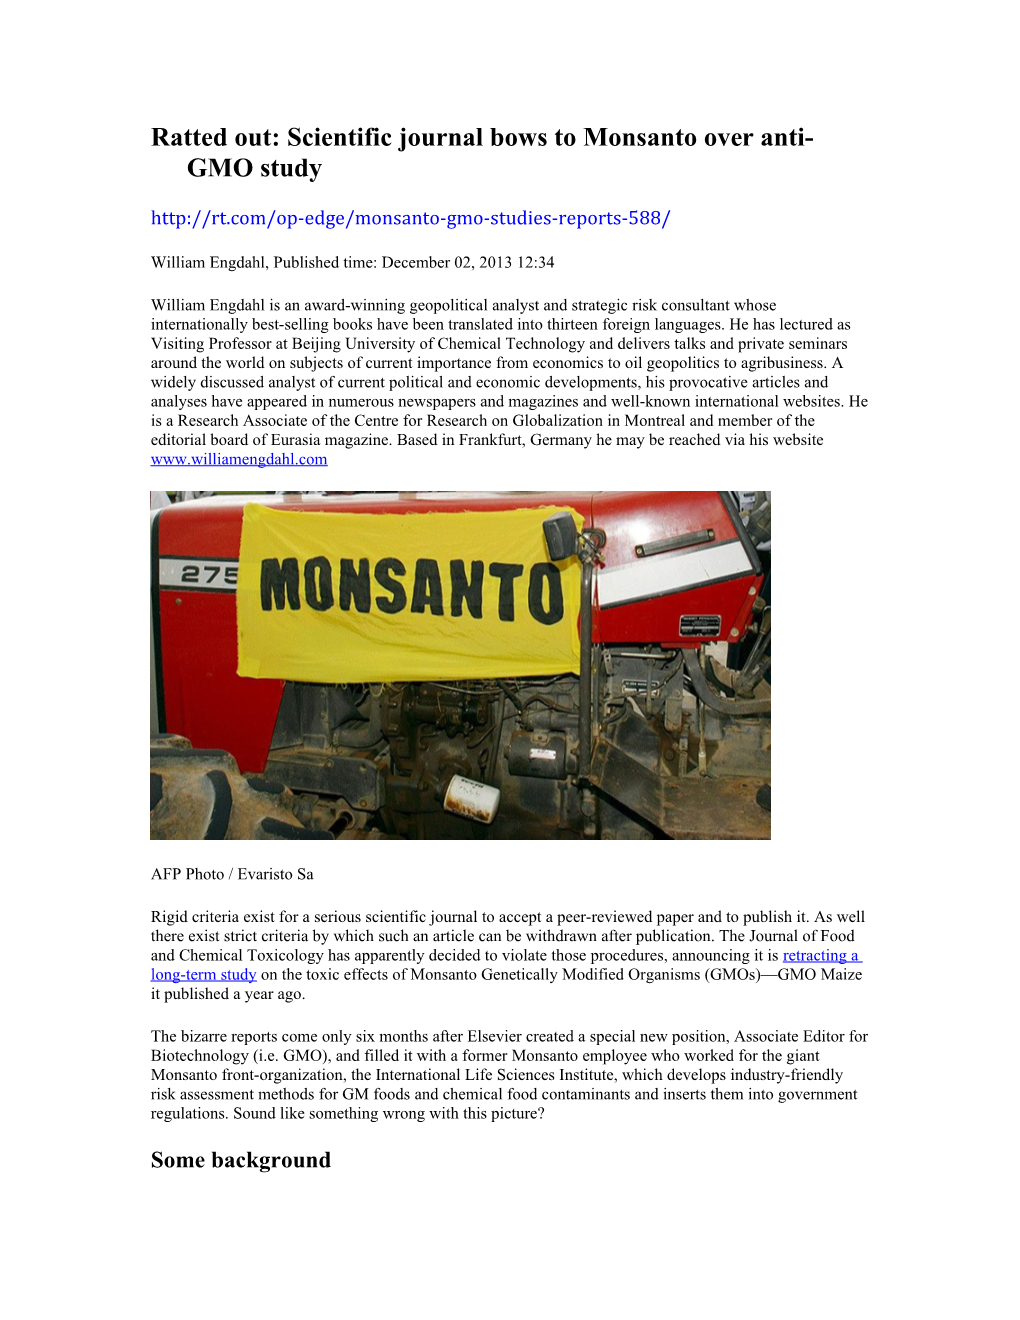 Ratted Out: Scientific Journal Bows to Monsanto Over Anti-GMO Study